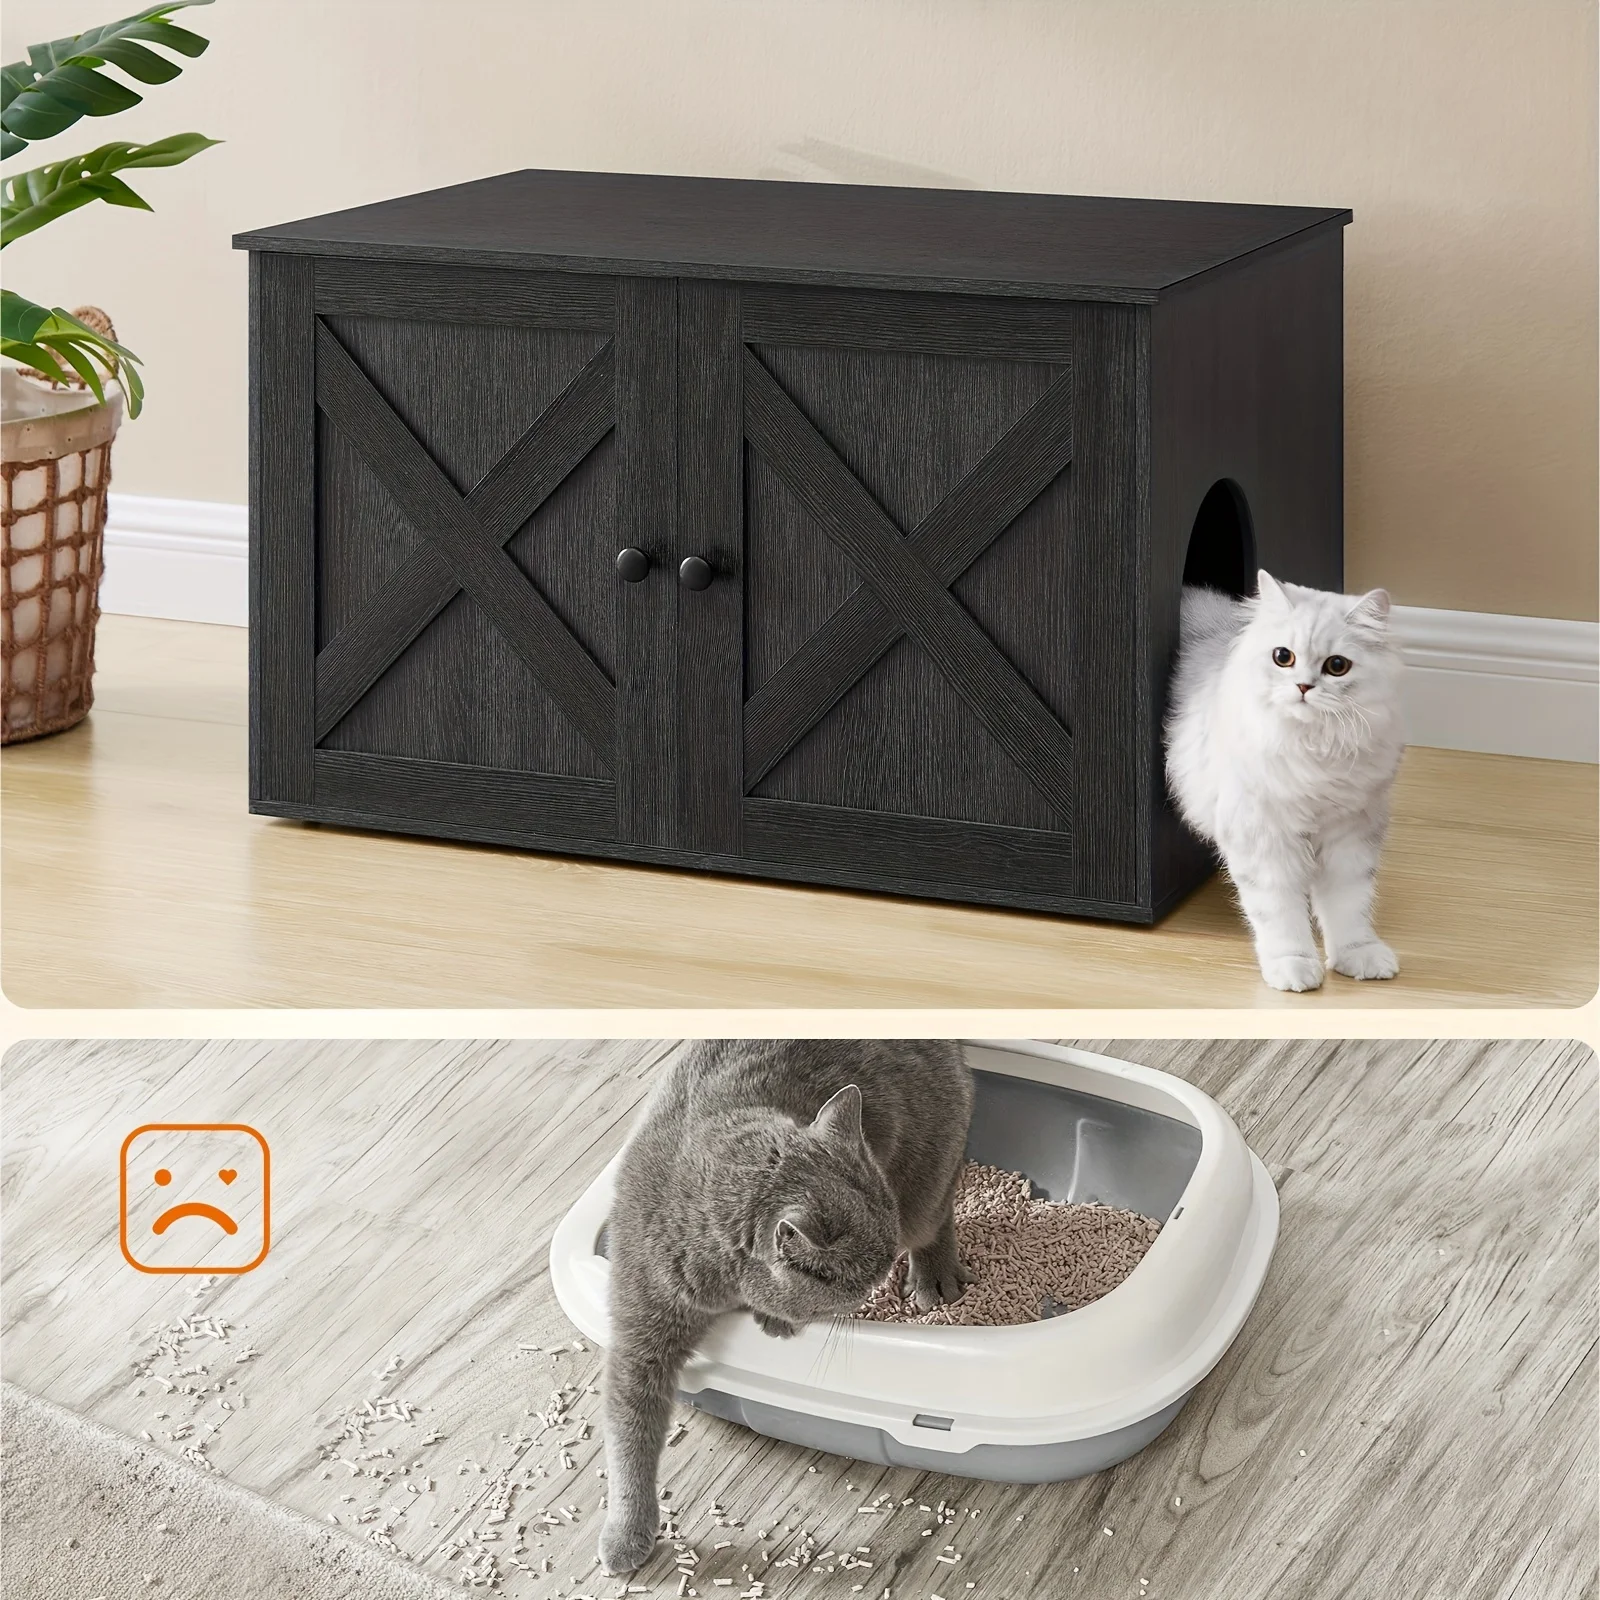 

Cat Litter Box Enclosure, Litter Box Furniture Hidden With Removable Divider, Indoor Cat House, End Table, 31.5 X 20.9 X 19.7 In